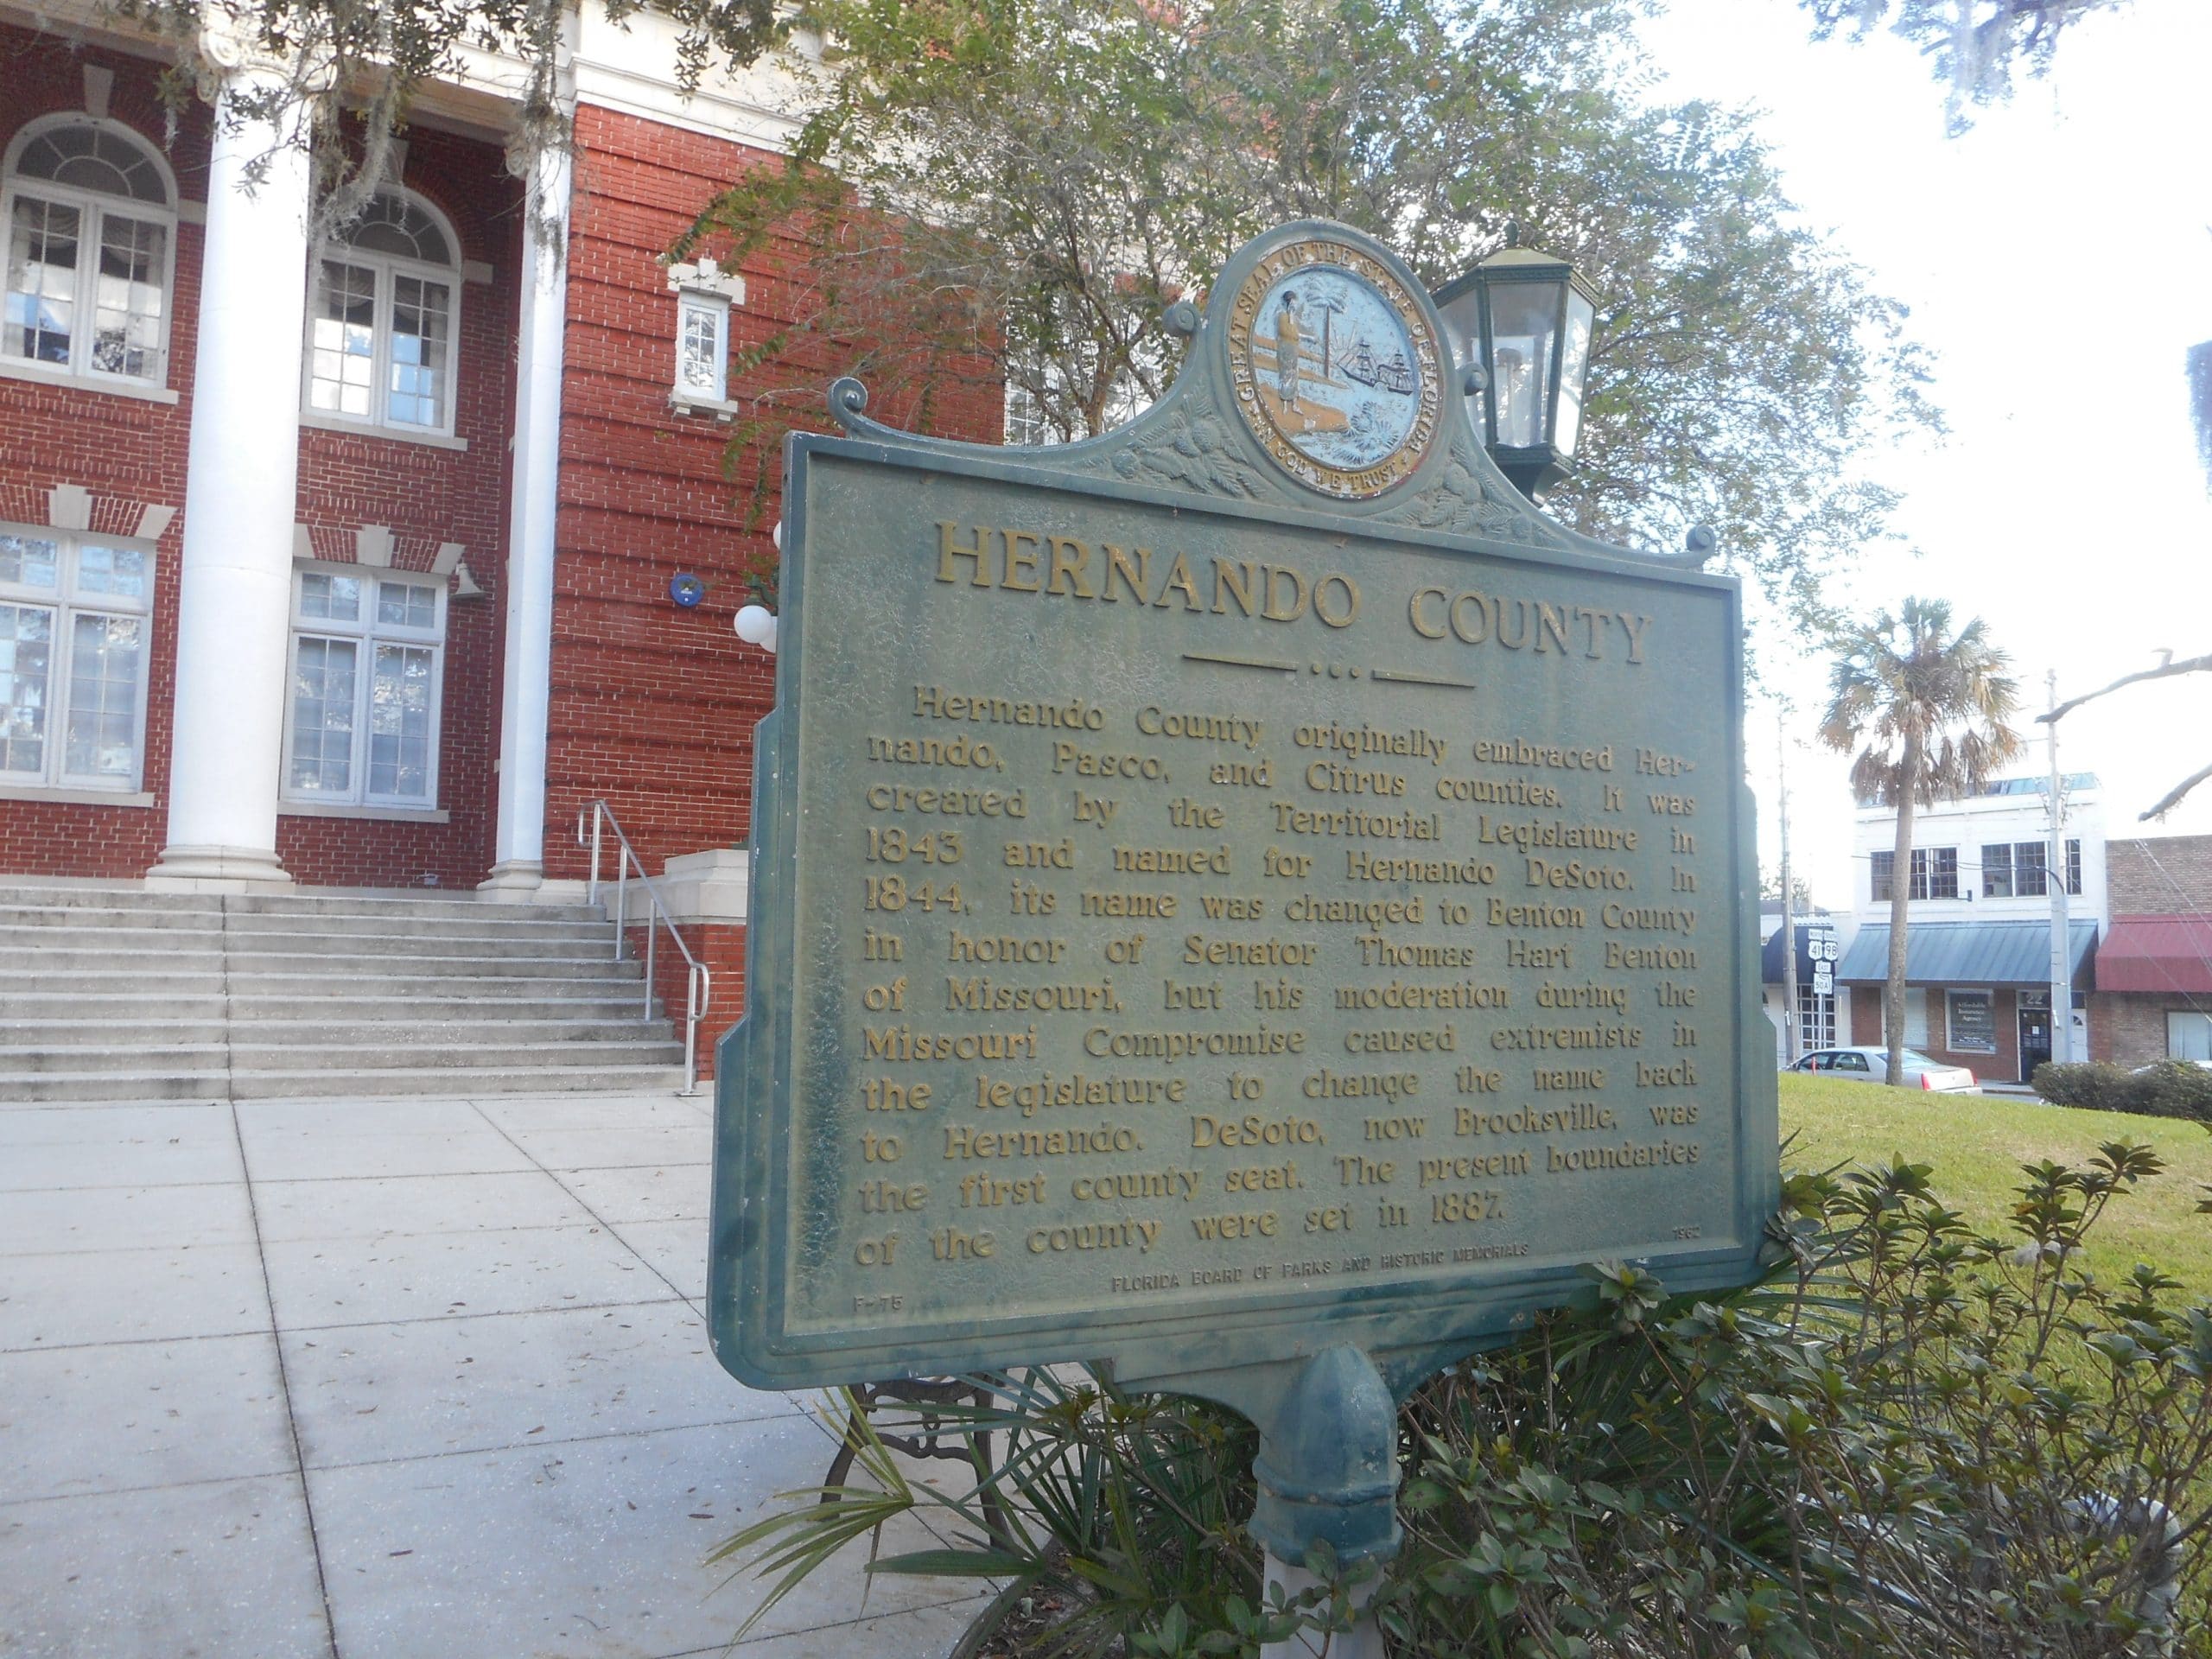 File photo of the Hernando County Courthouse